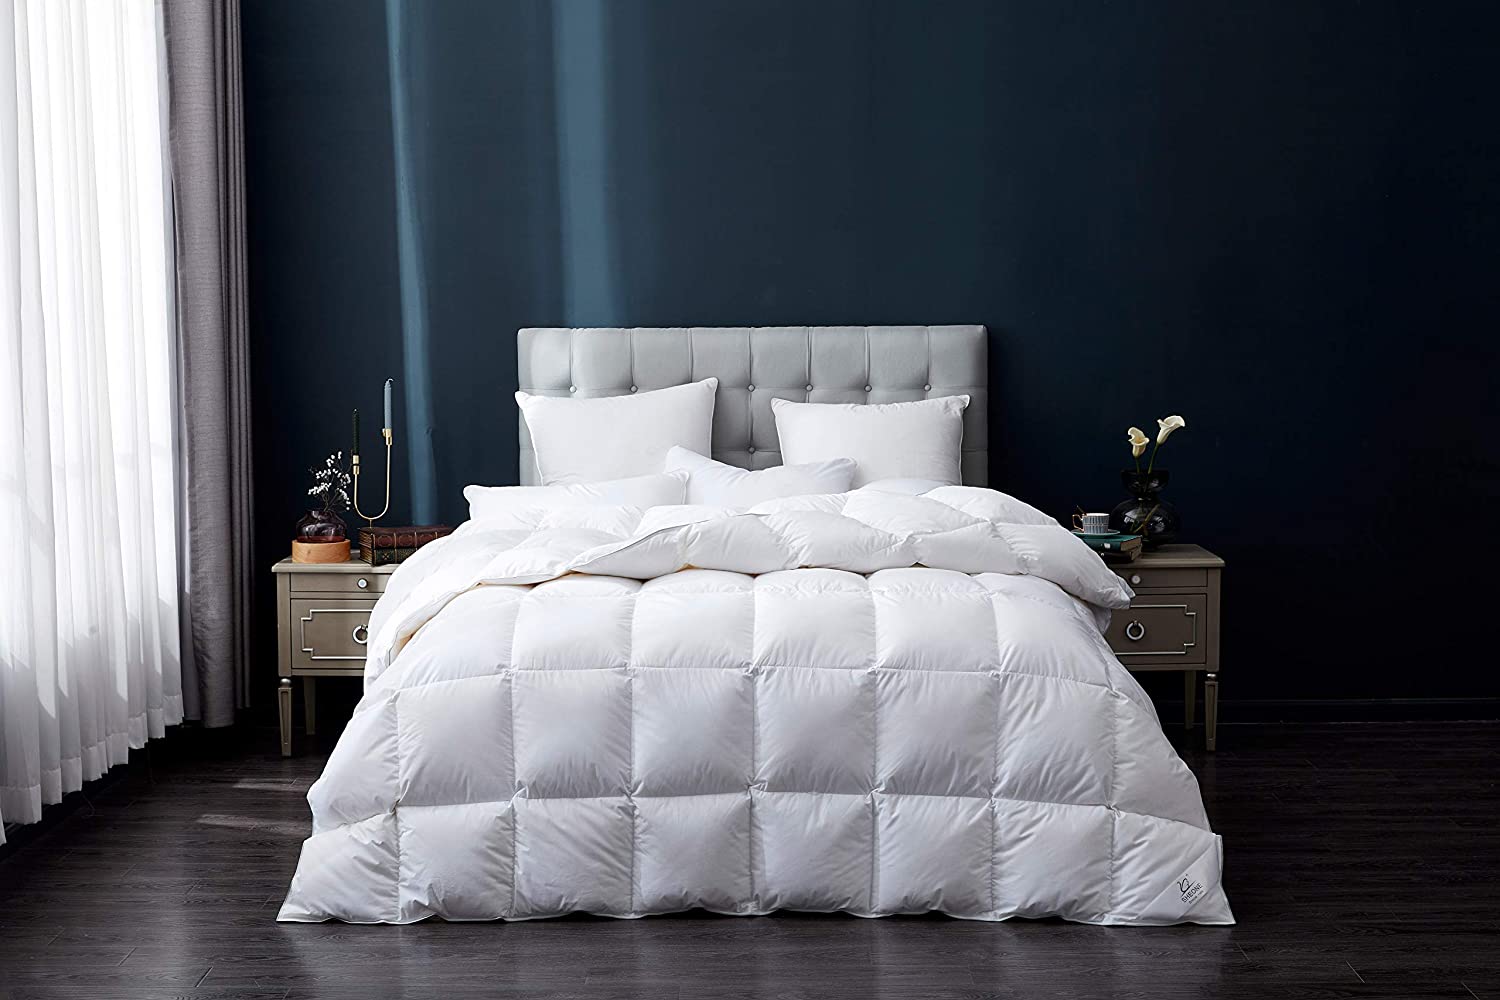 Softer Details about   SHEONE Luxurious All-Season Down Comforter Duvet Insert with Corner Tabs 